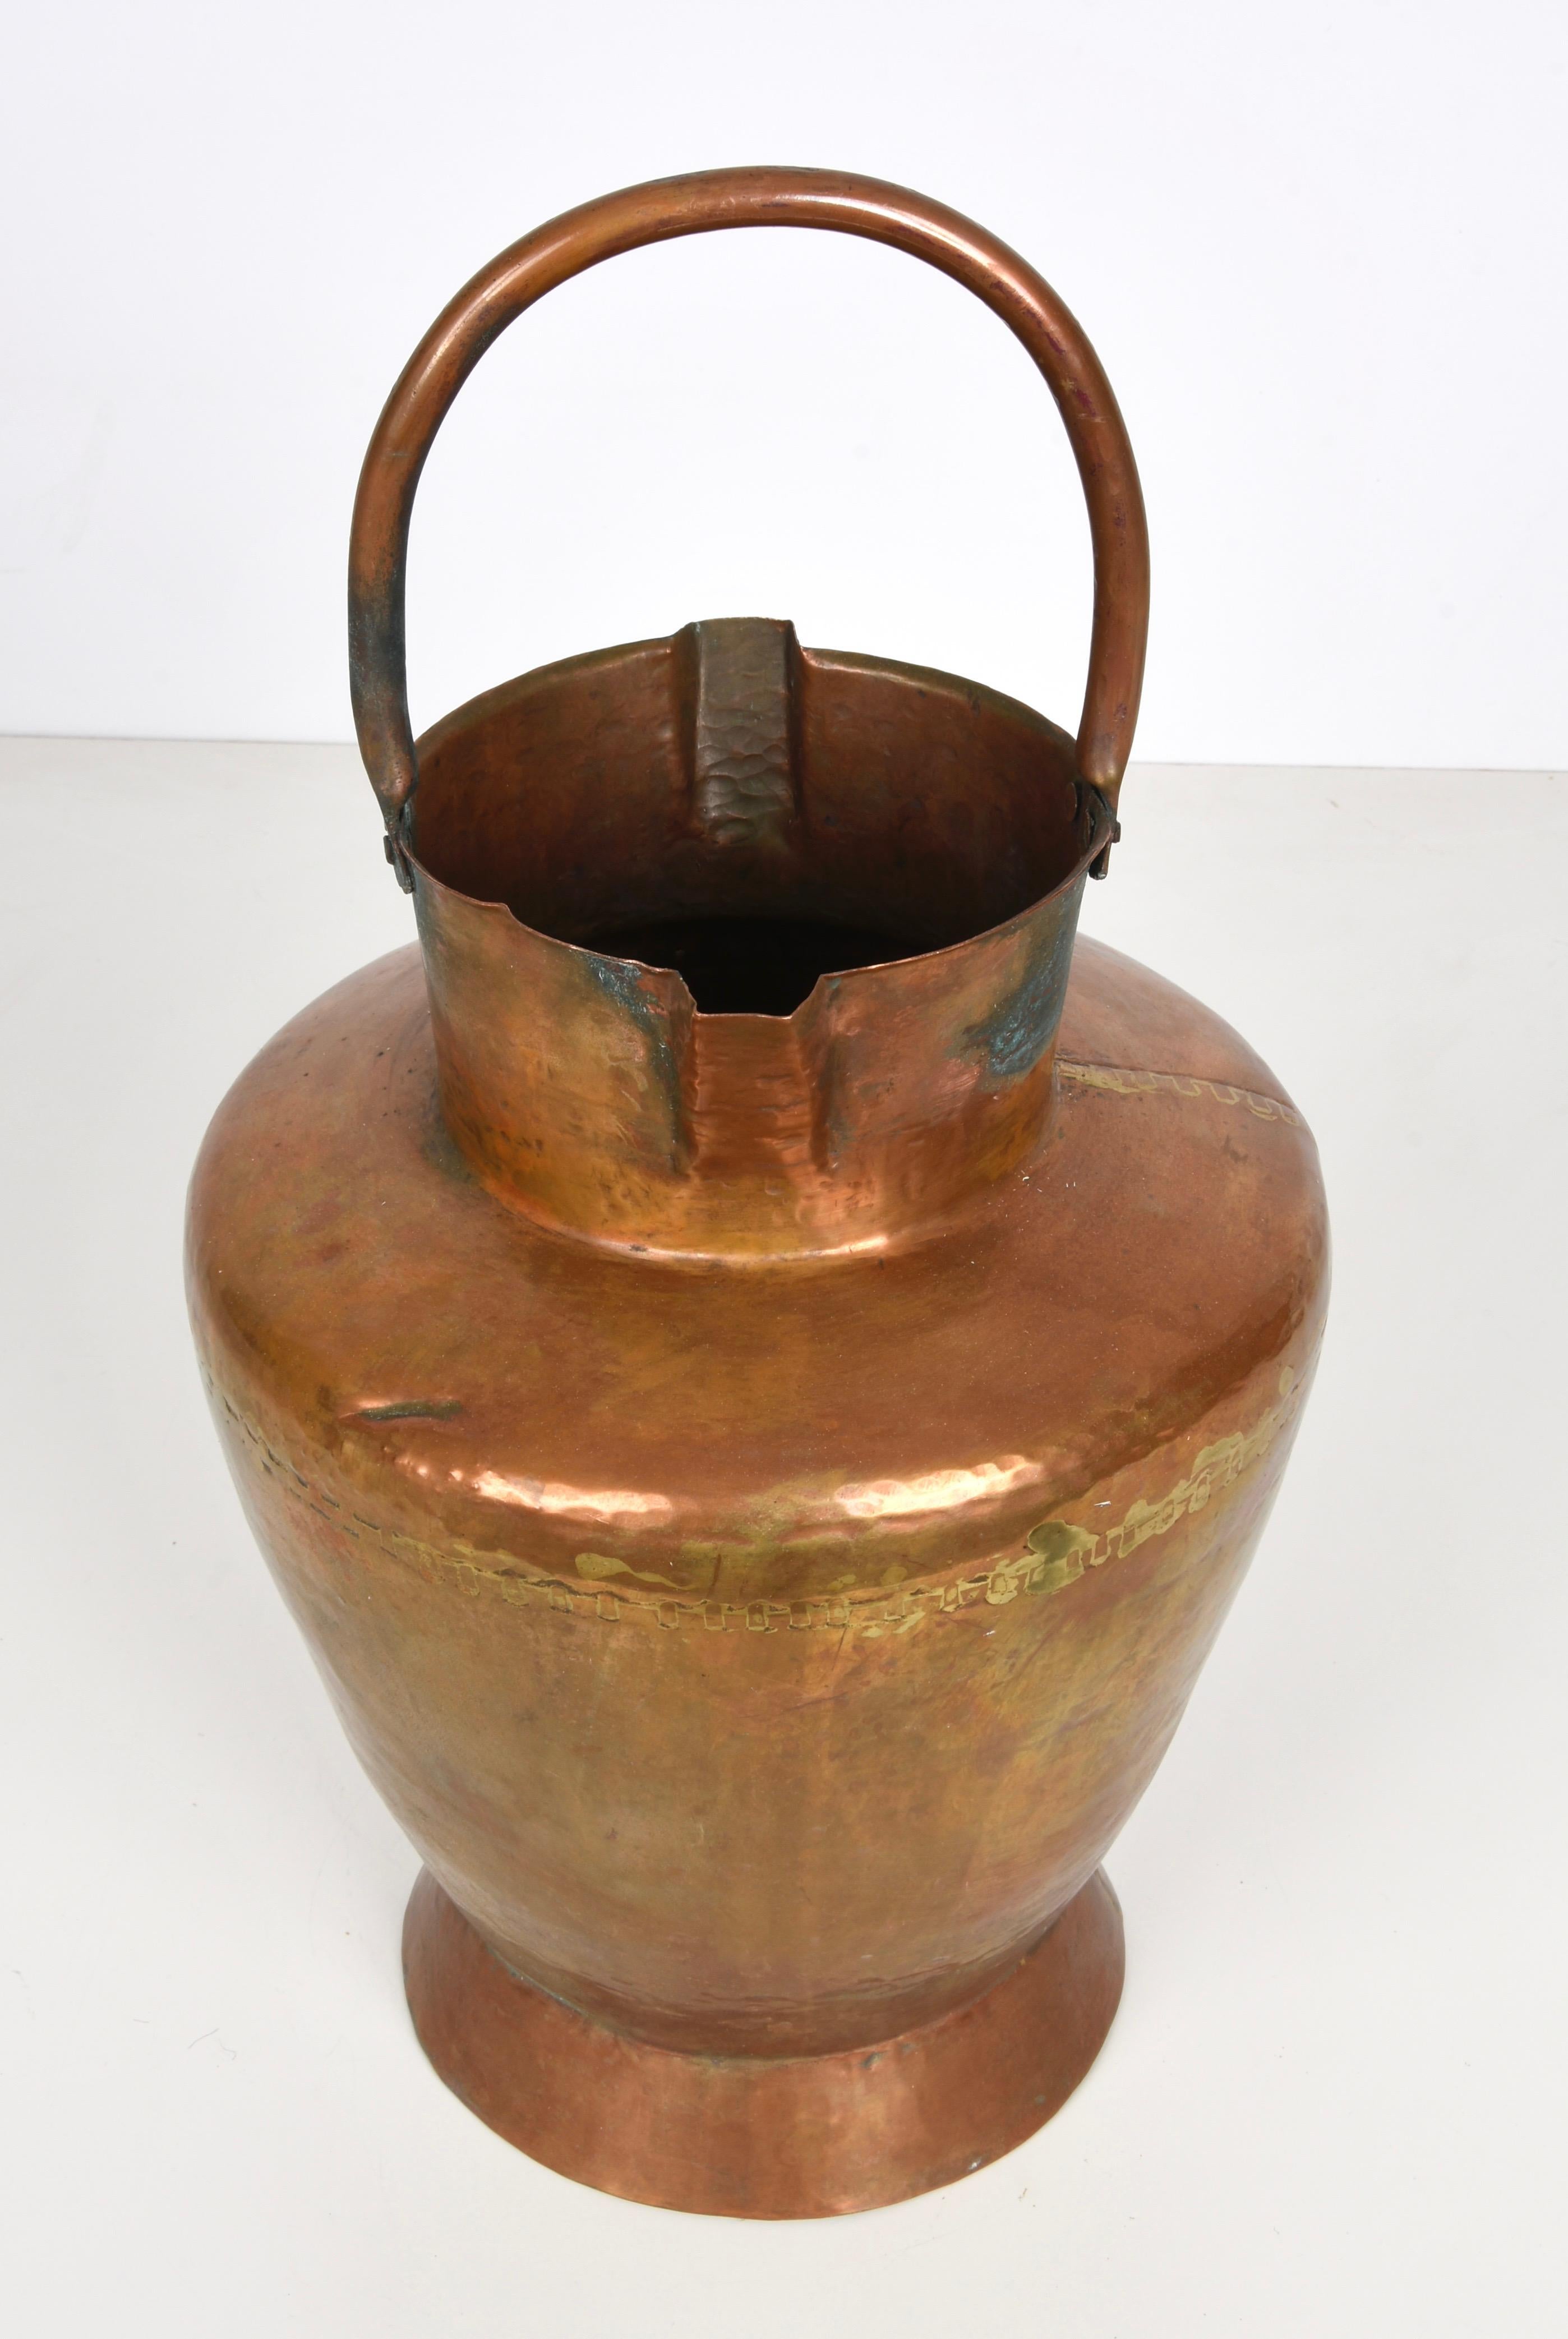 Amazing Tuscan Mezzina vase in copper, 48 cm height. This wonderful piece was designed in Italy during the 1930s.

This great vase is amazing as it has two spouts and a single handle. Amazing production from the first half of the 20th